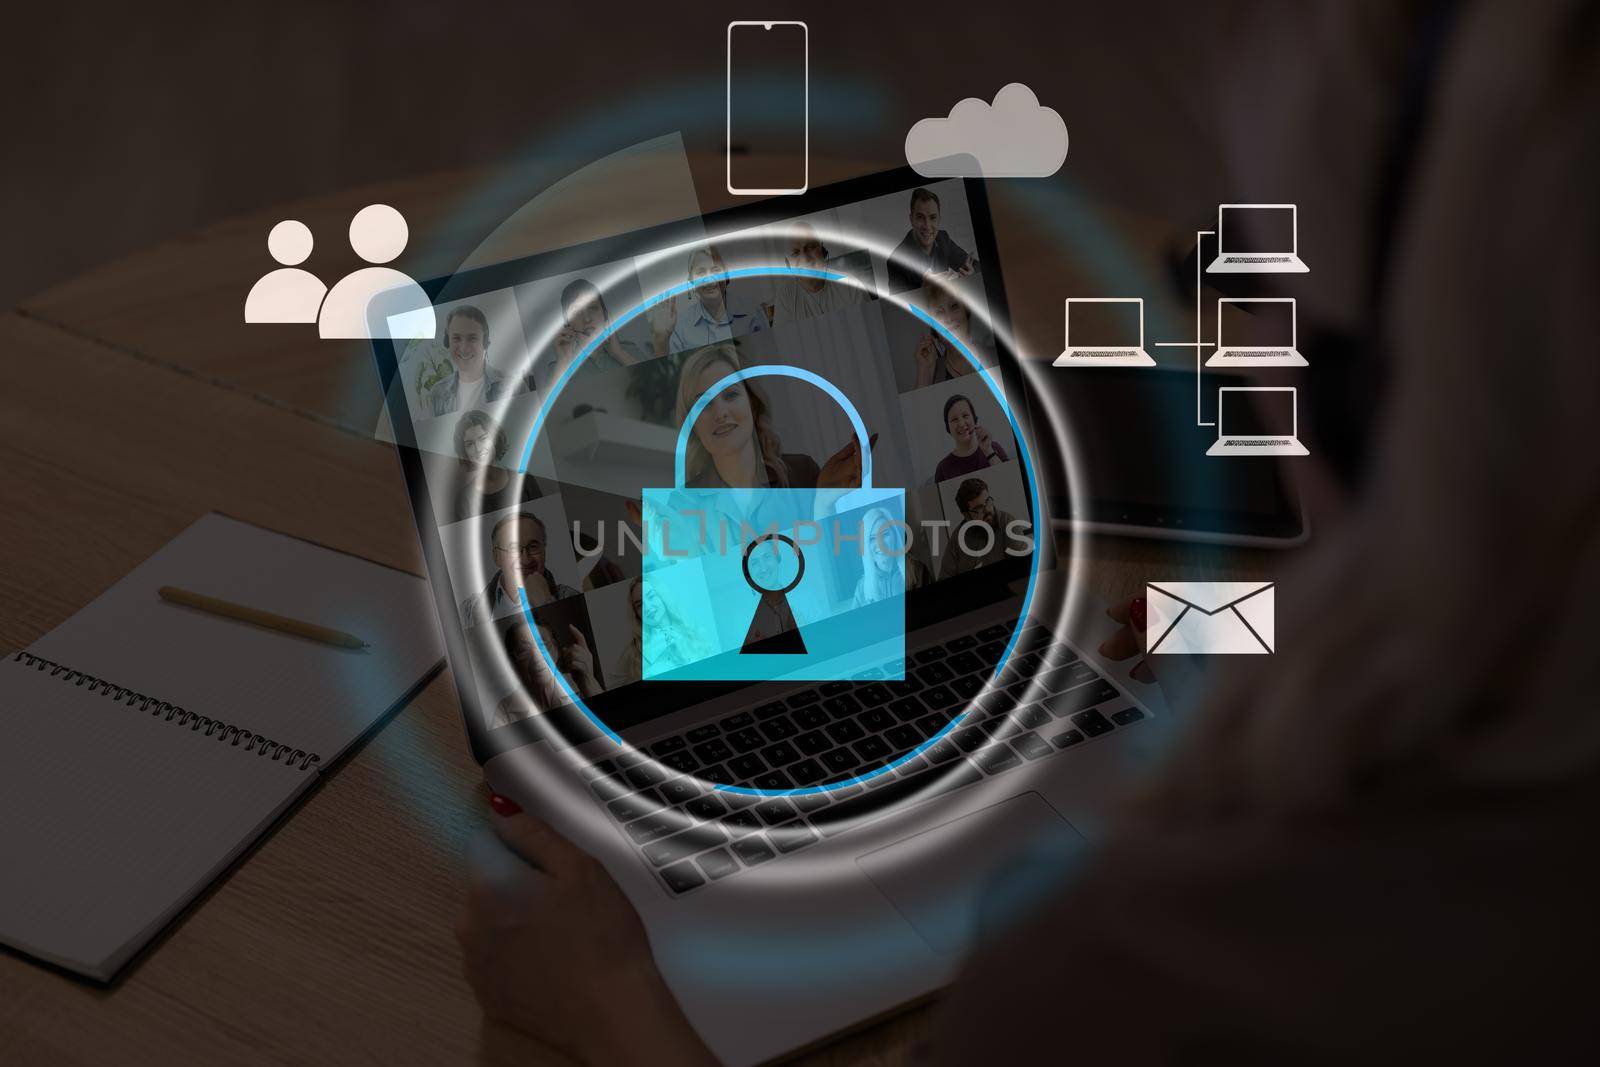 Digital cybersecurity and network protection concept. Virtual locking mechanism to access shared resources. Interactive virtual control screen with padlock. laptop on background.